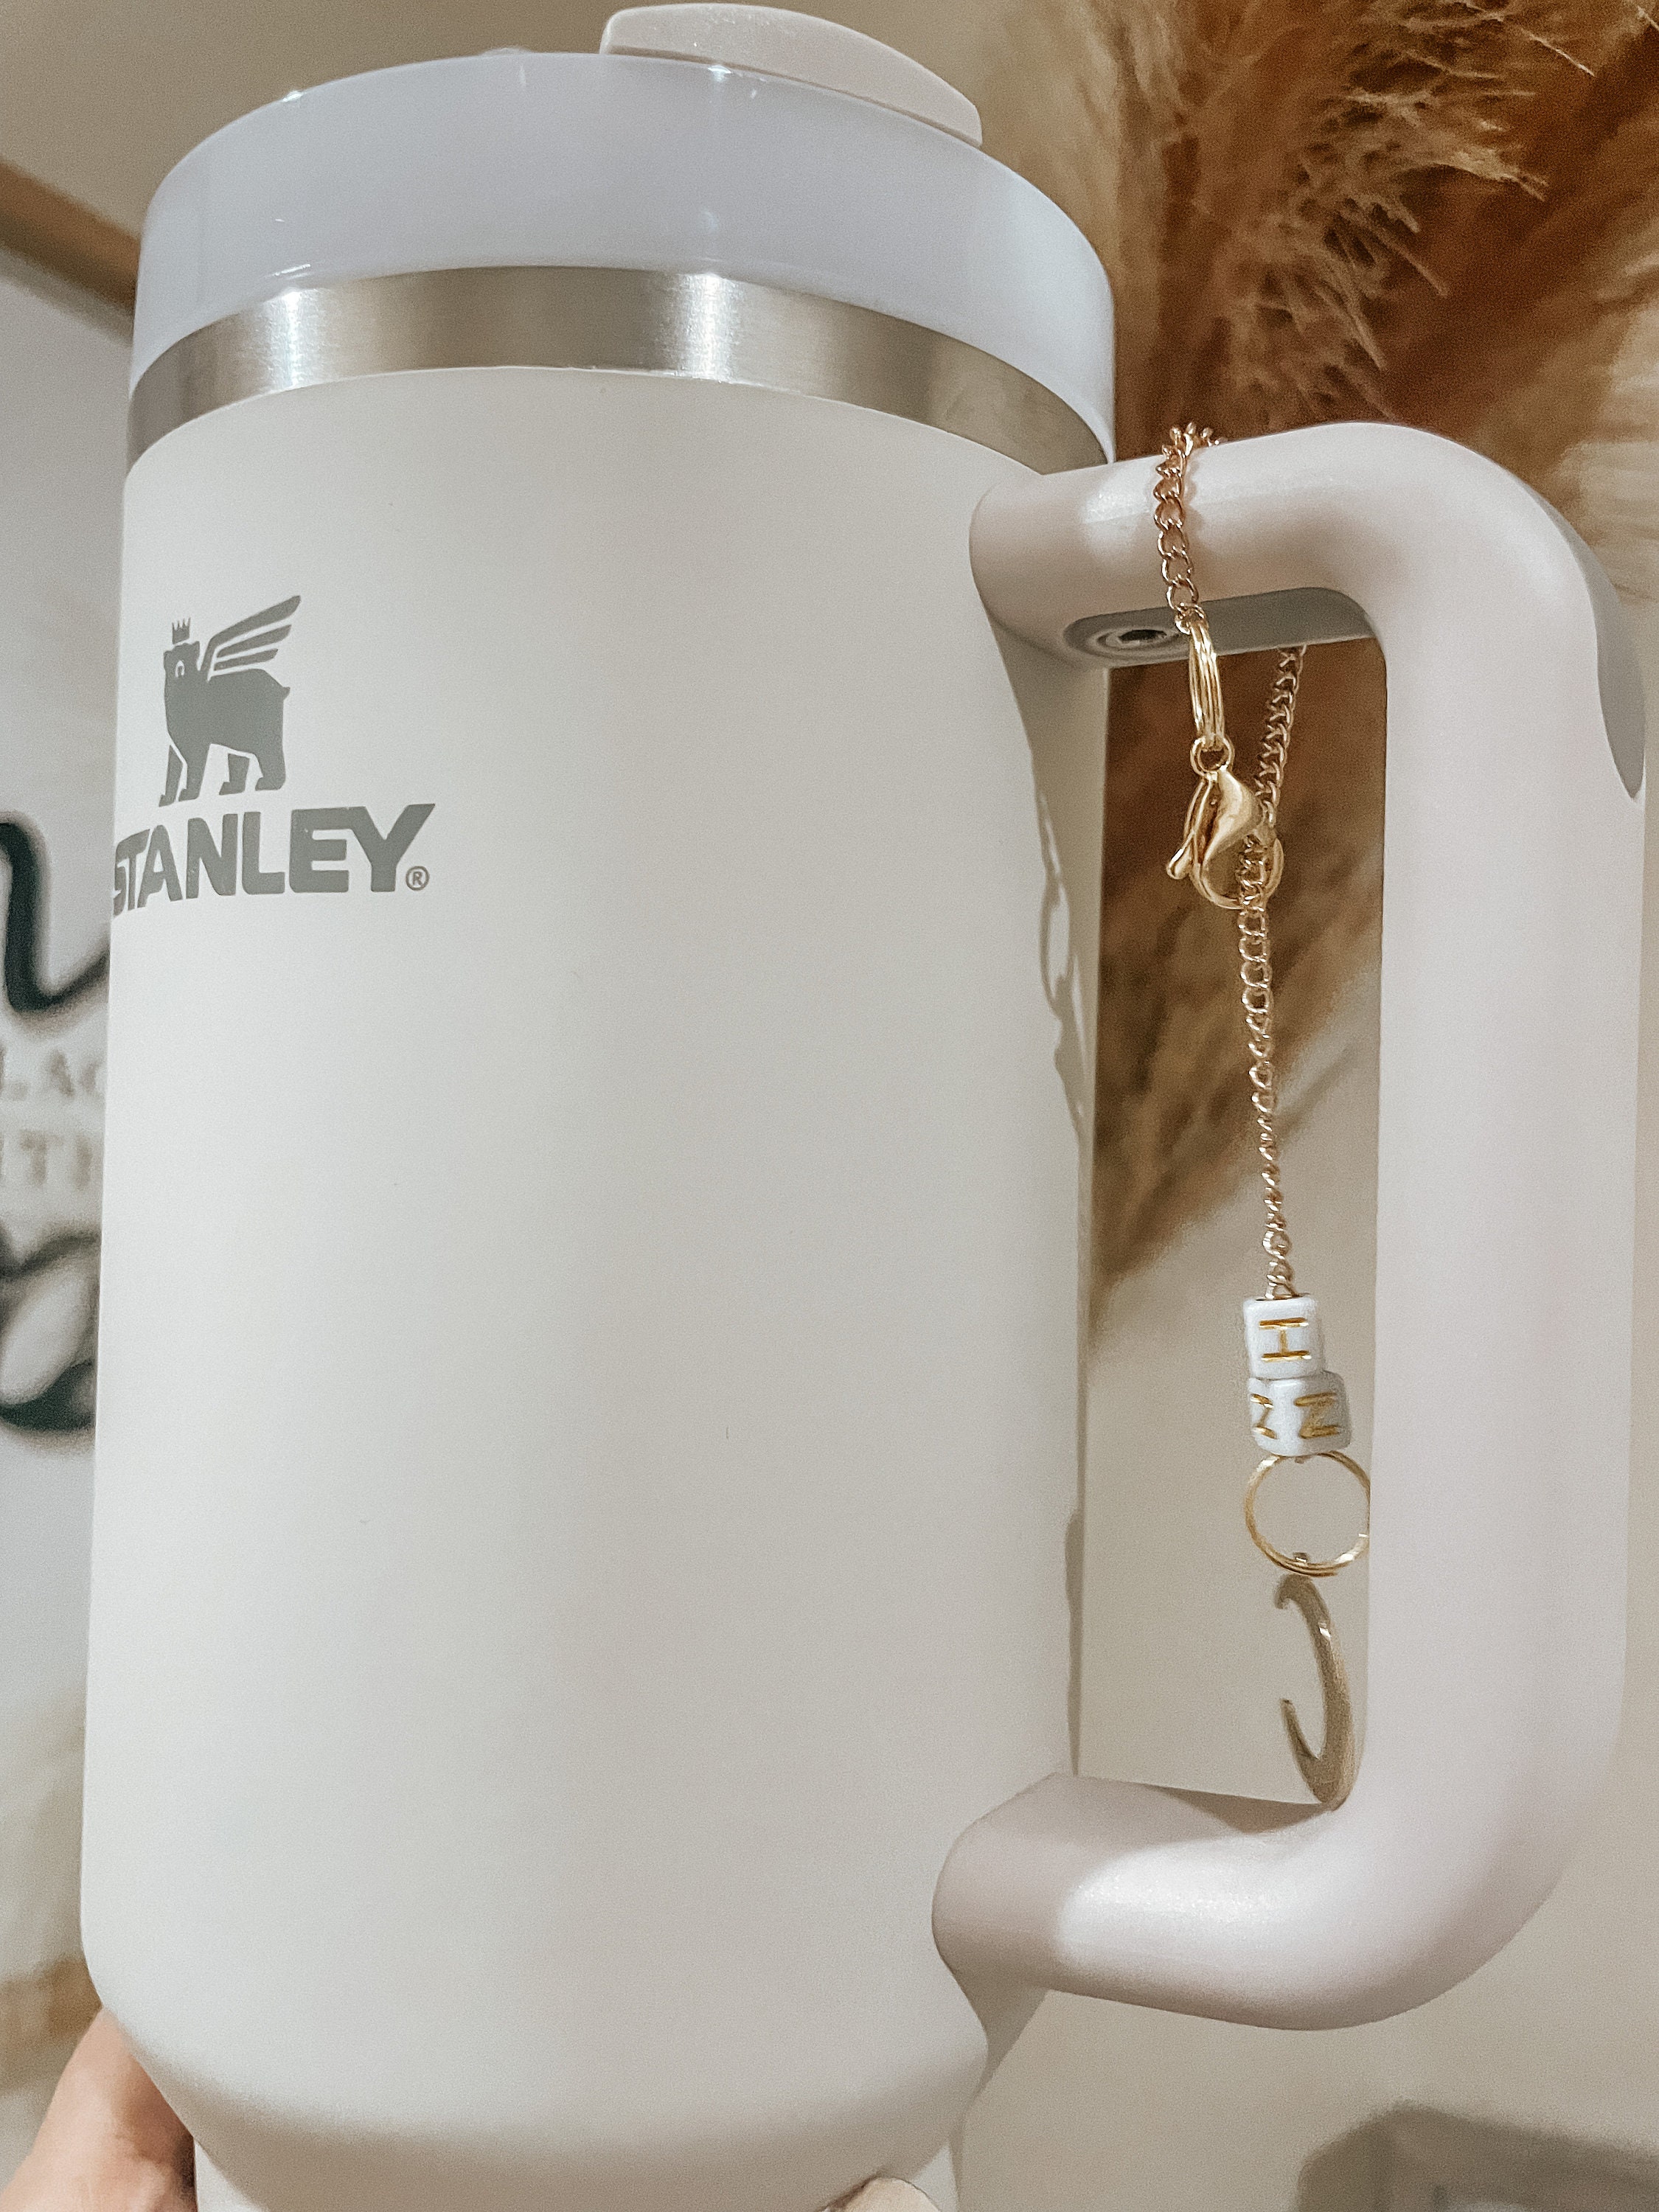 Stanley Tumbler Cup Moon Charm Accessories for Water Bottle 